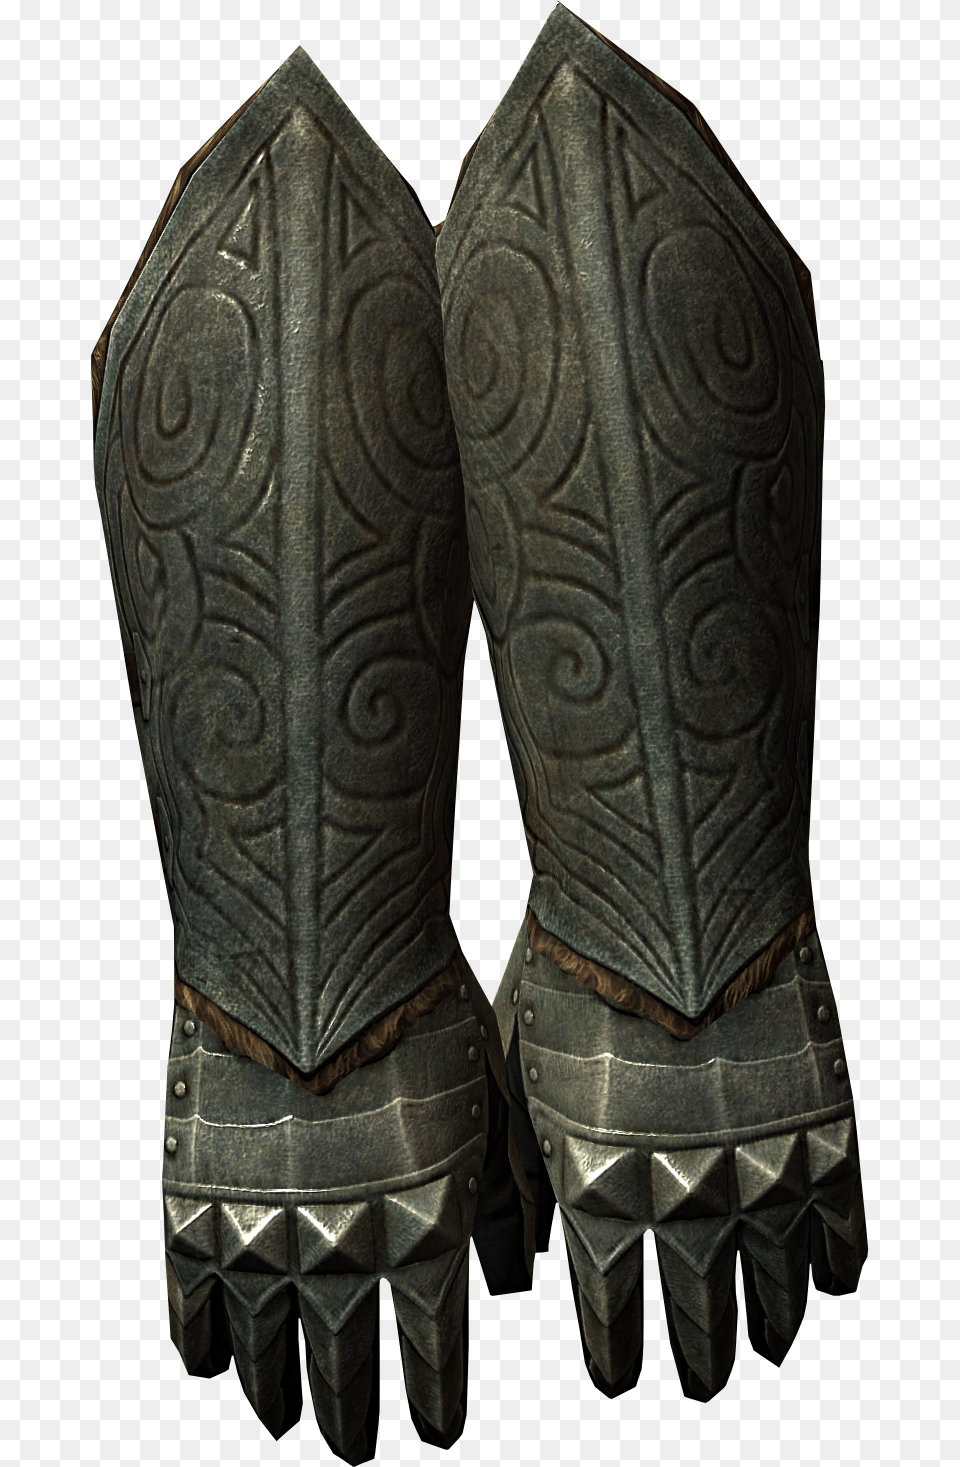 Medieval Armor Fist, Clothing, Coat, Boot, Cowboy Boot Png Image